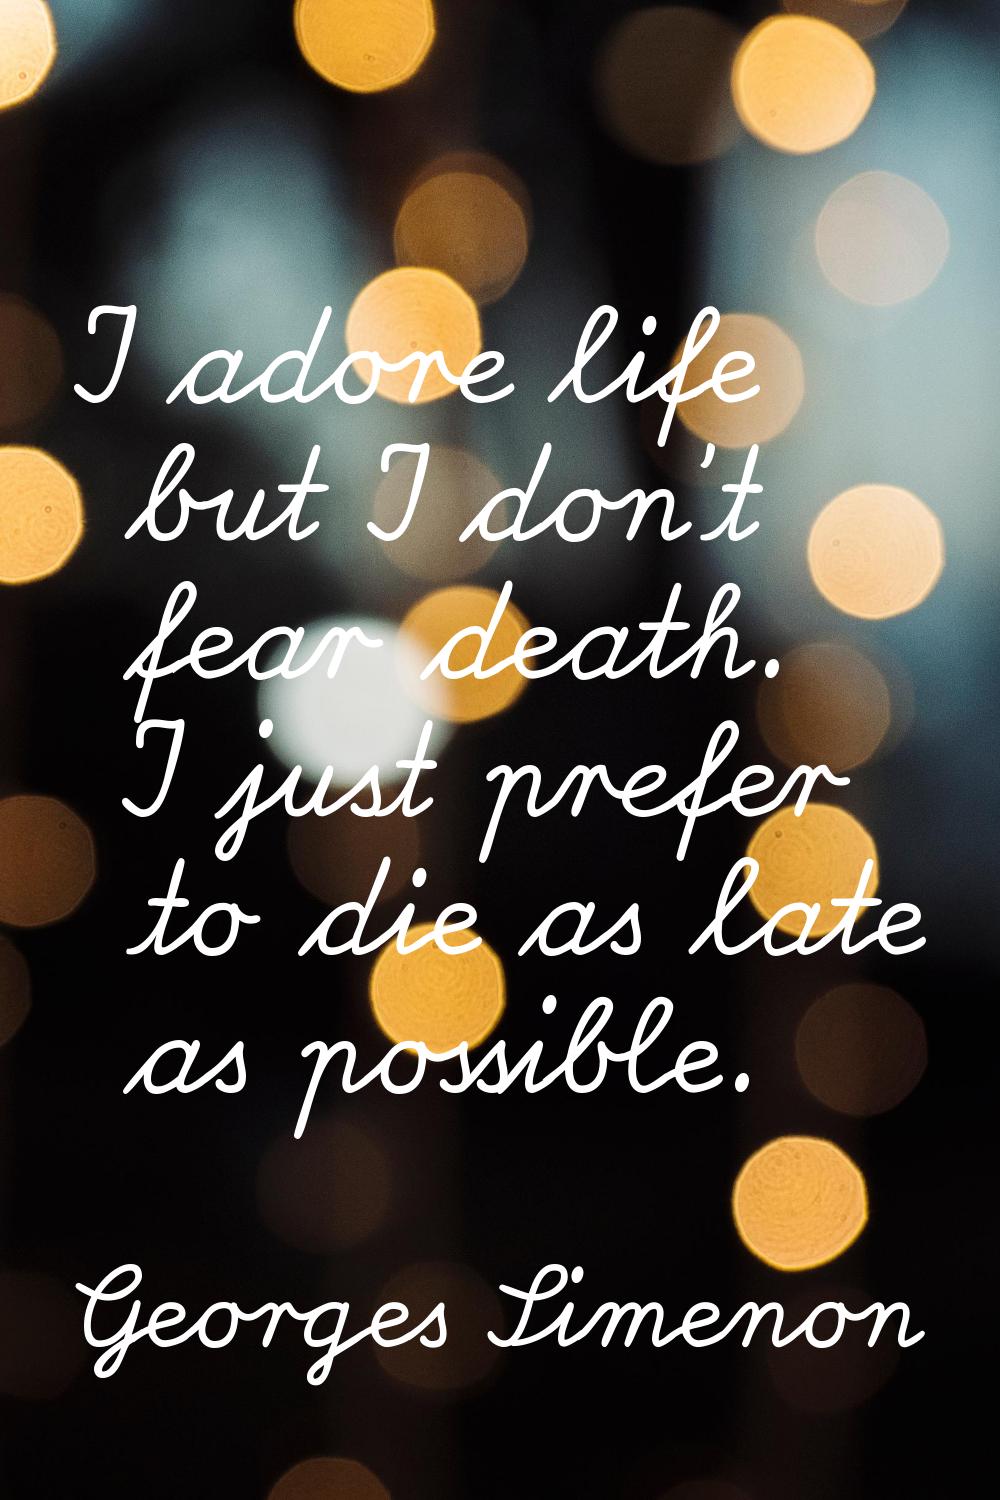 I adore life but I don't fear death. I just prefer to die as late as possible.